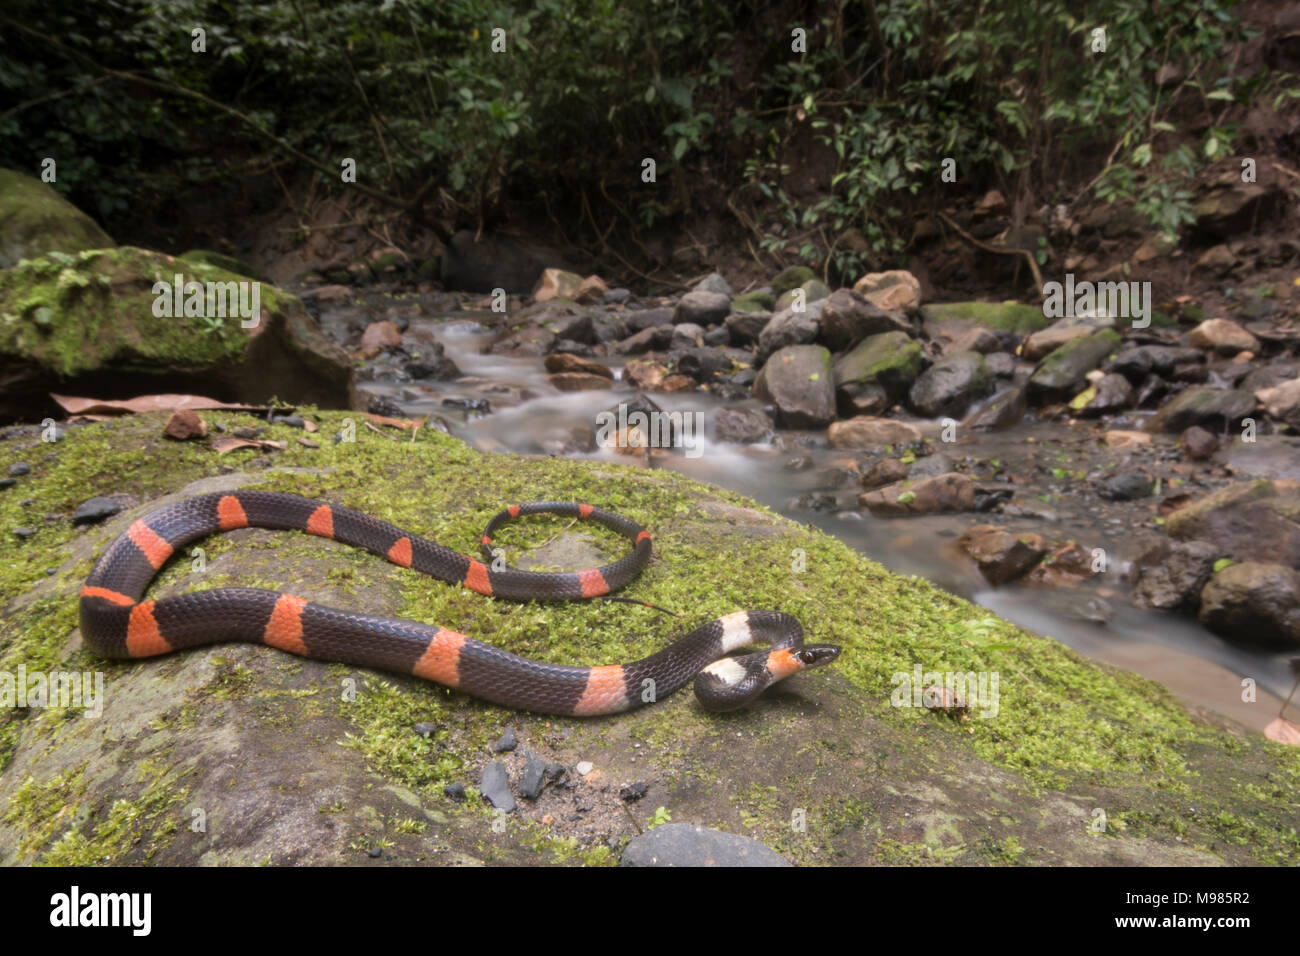 A false coral snake (Oxyrhopus petolarius) closely resembles the dangerous and venomous coral snakes but it is actually totally harmless. Stock Photo